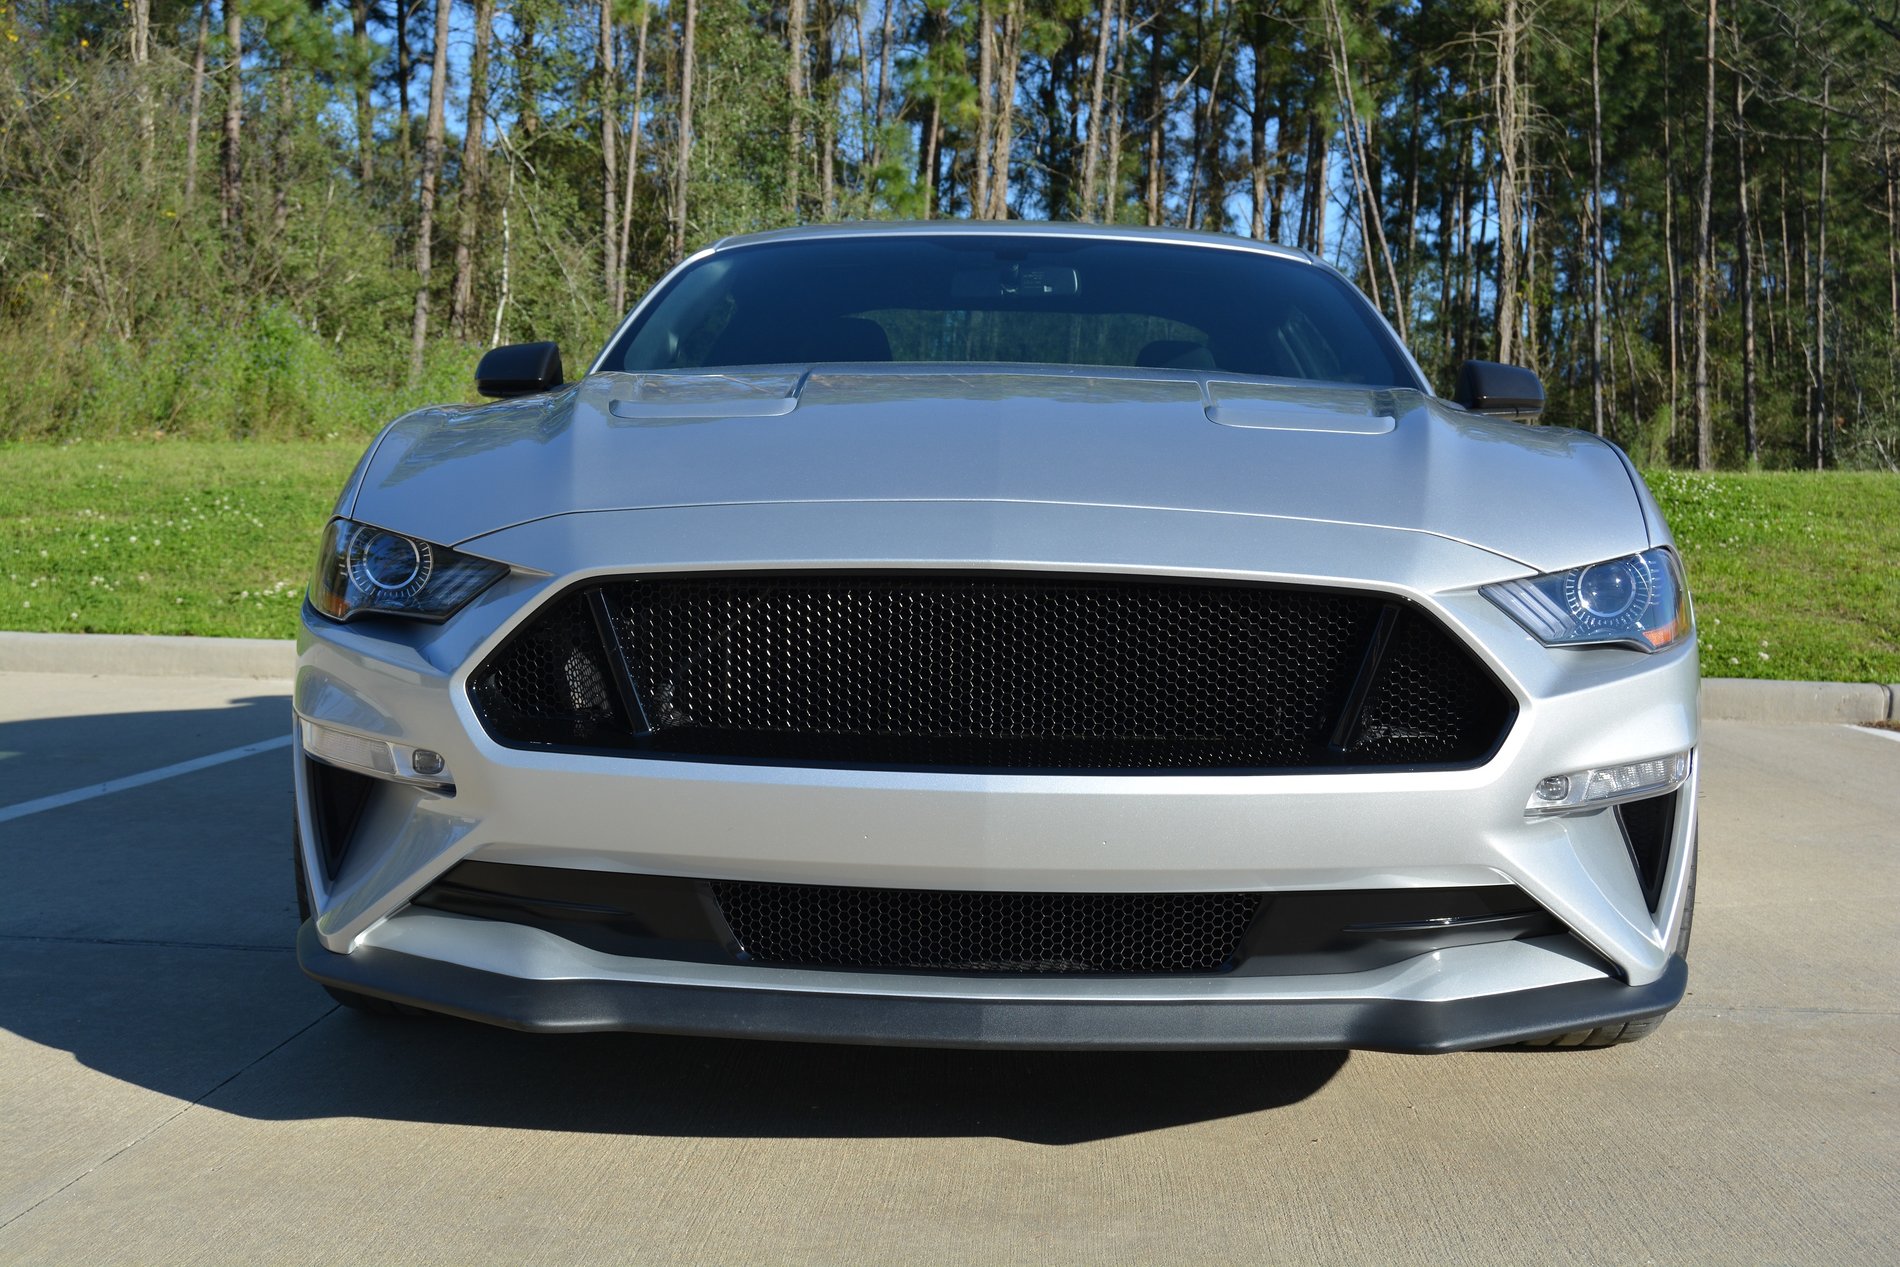 Mustang Silver 2018 New Grill2 small.jpg